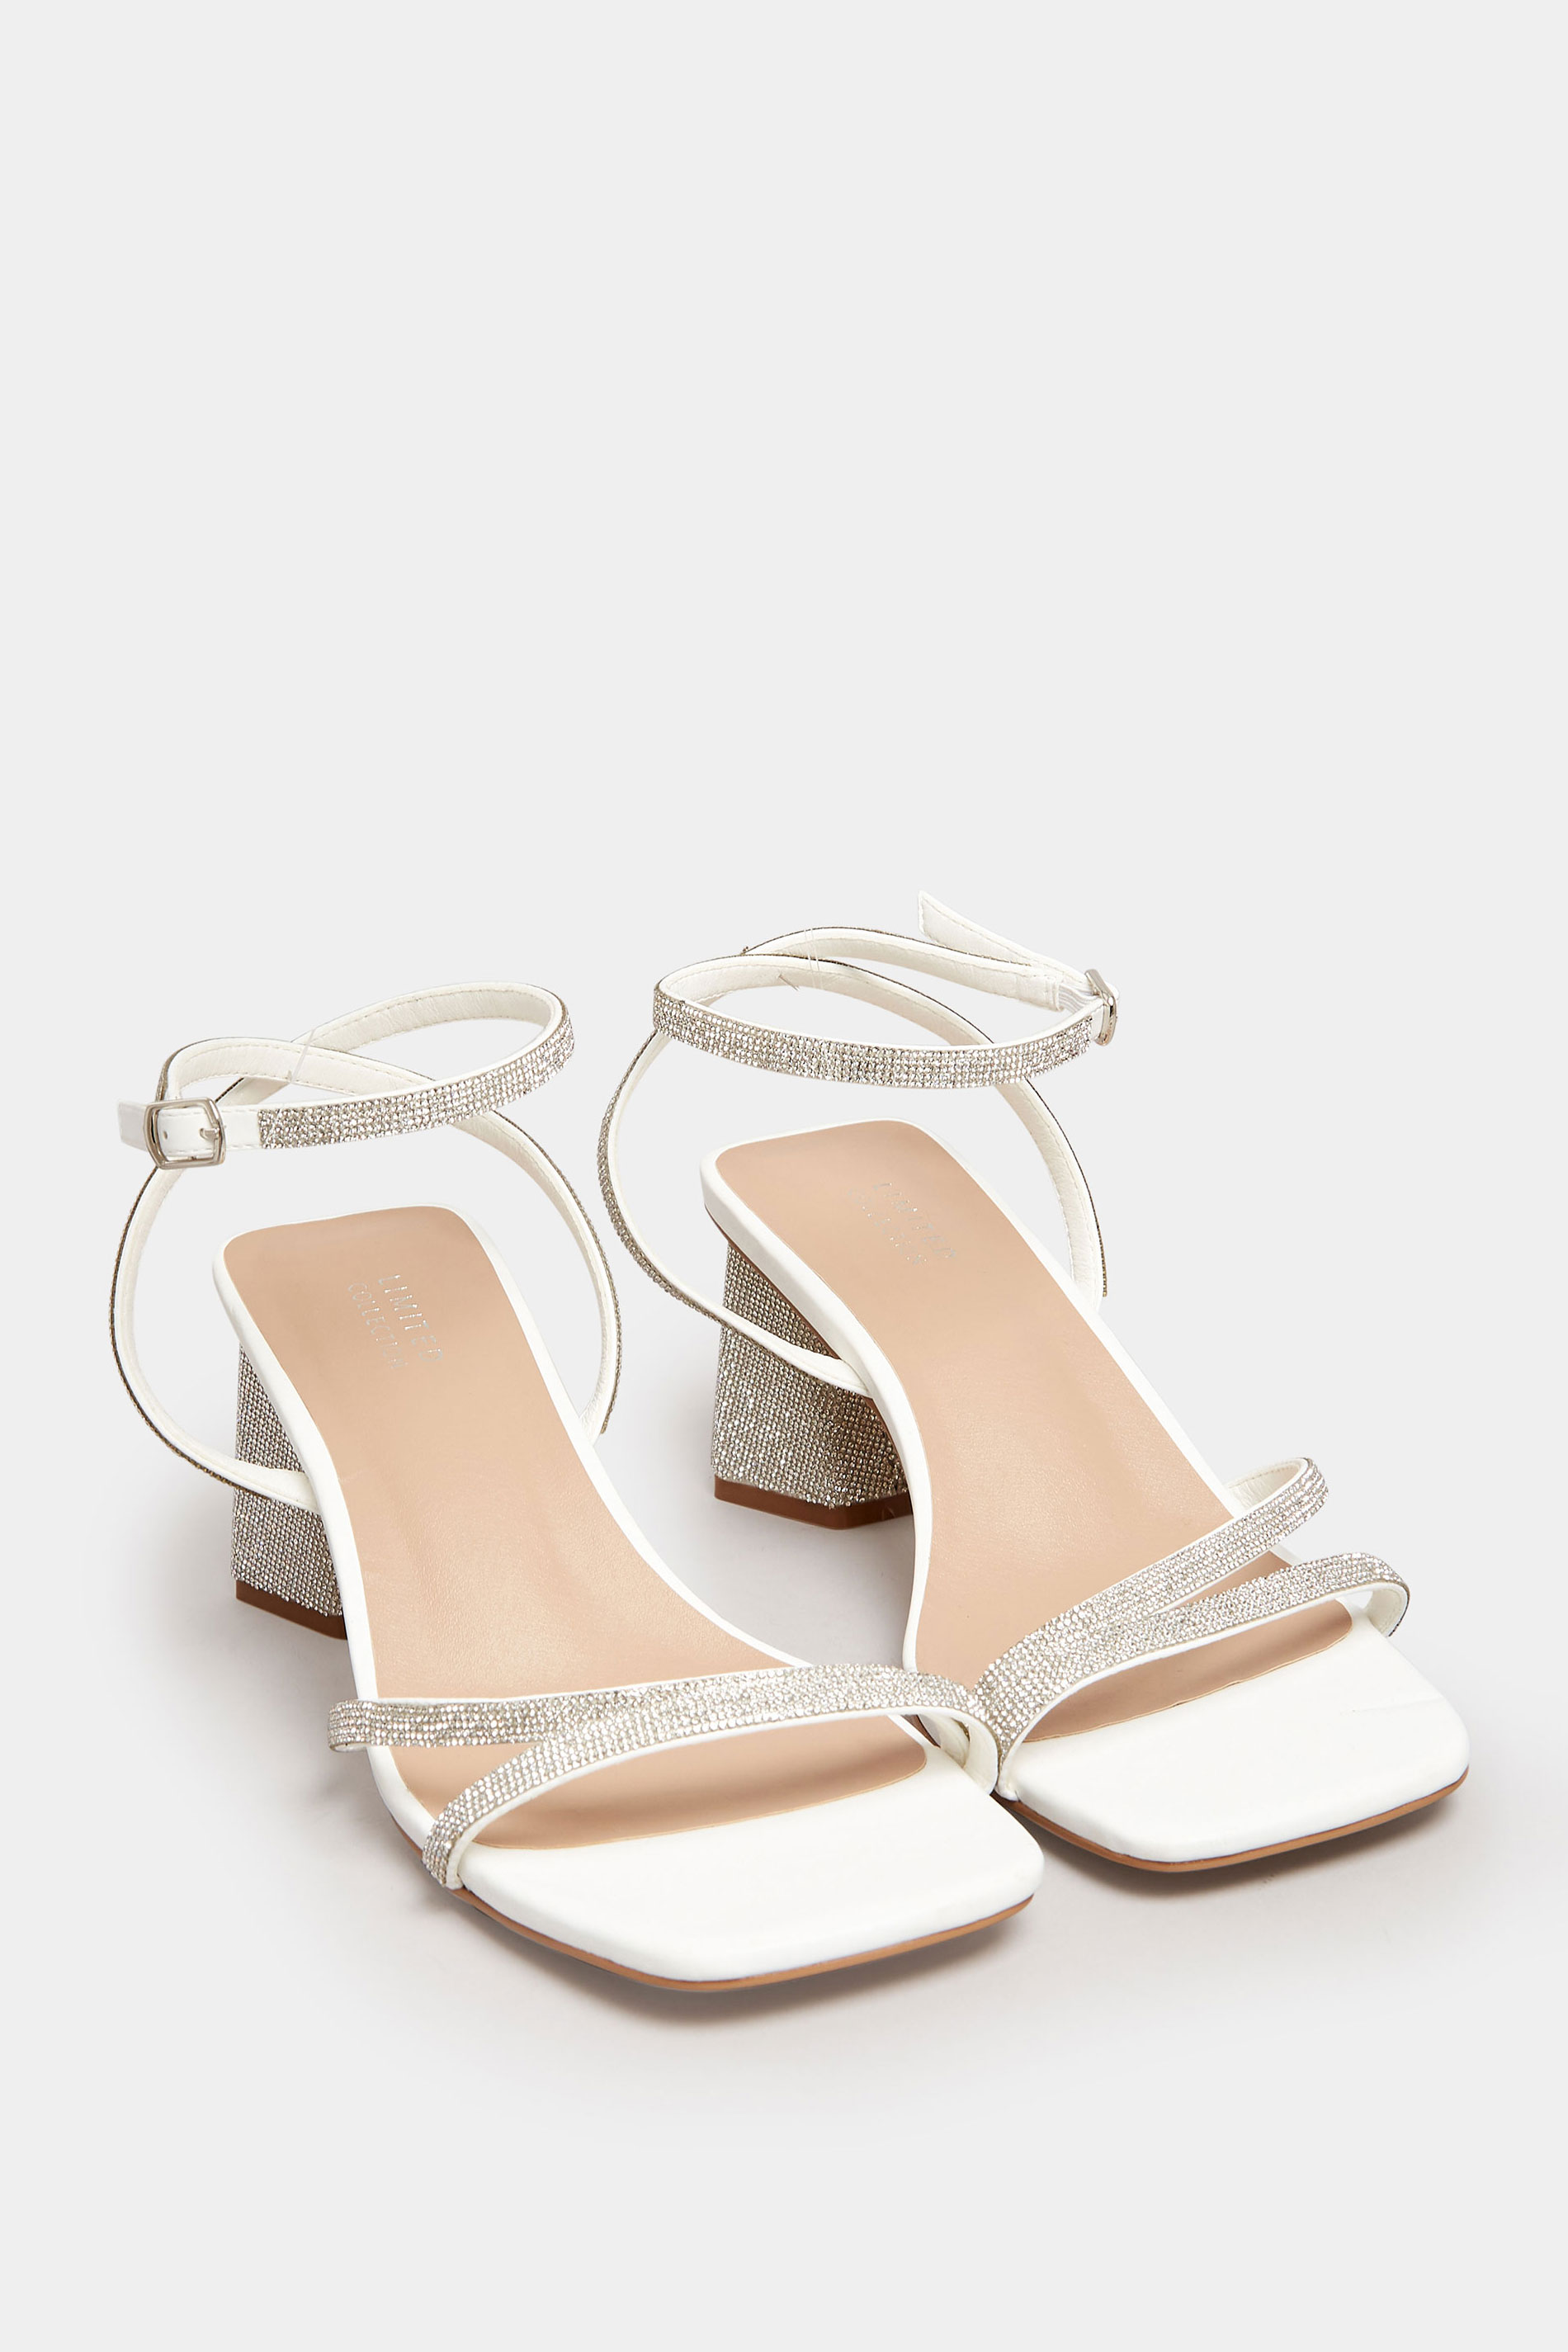 White Diamante Strappy Heel Sandals in Wide E Fit & Extra Wide EEE Fit | Yours Clothing 2